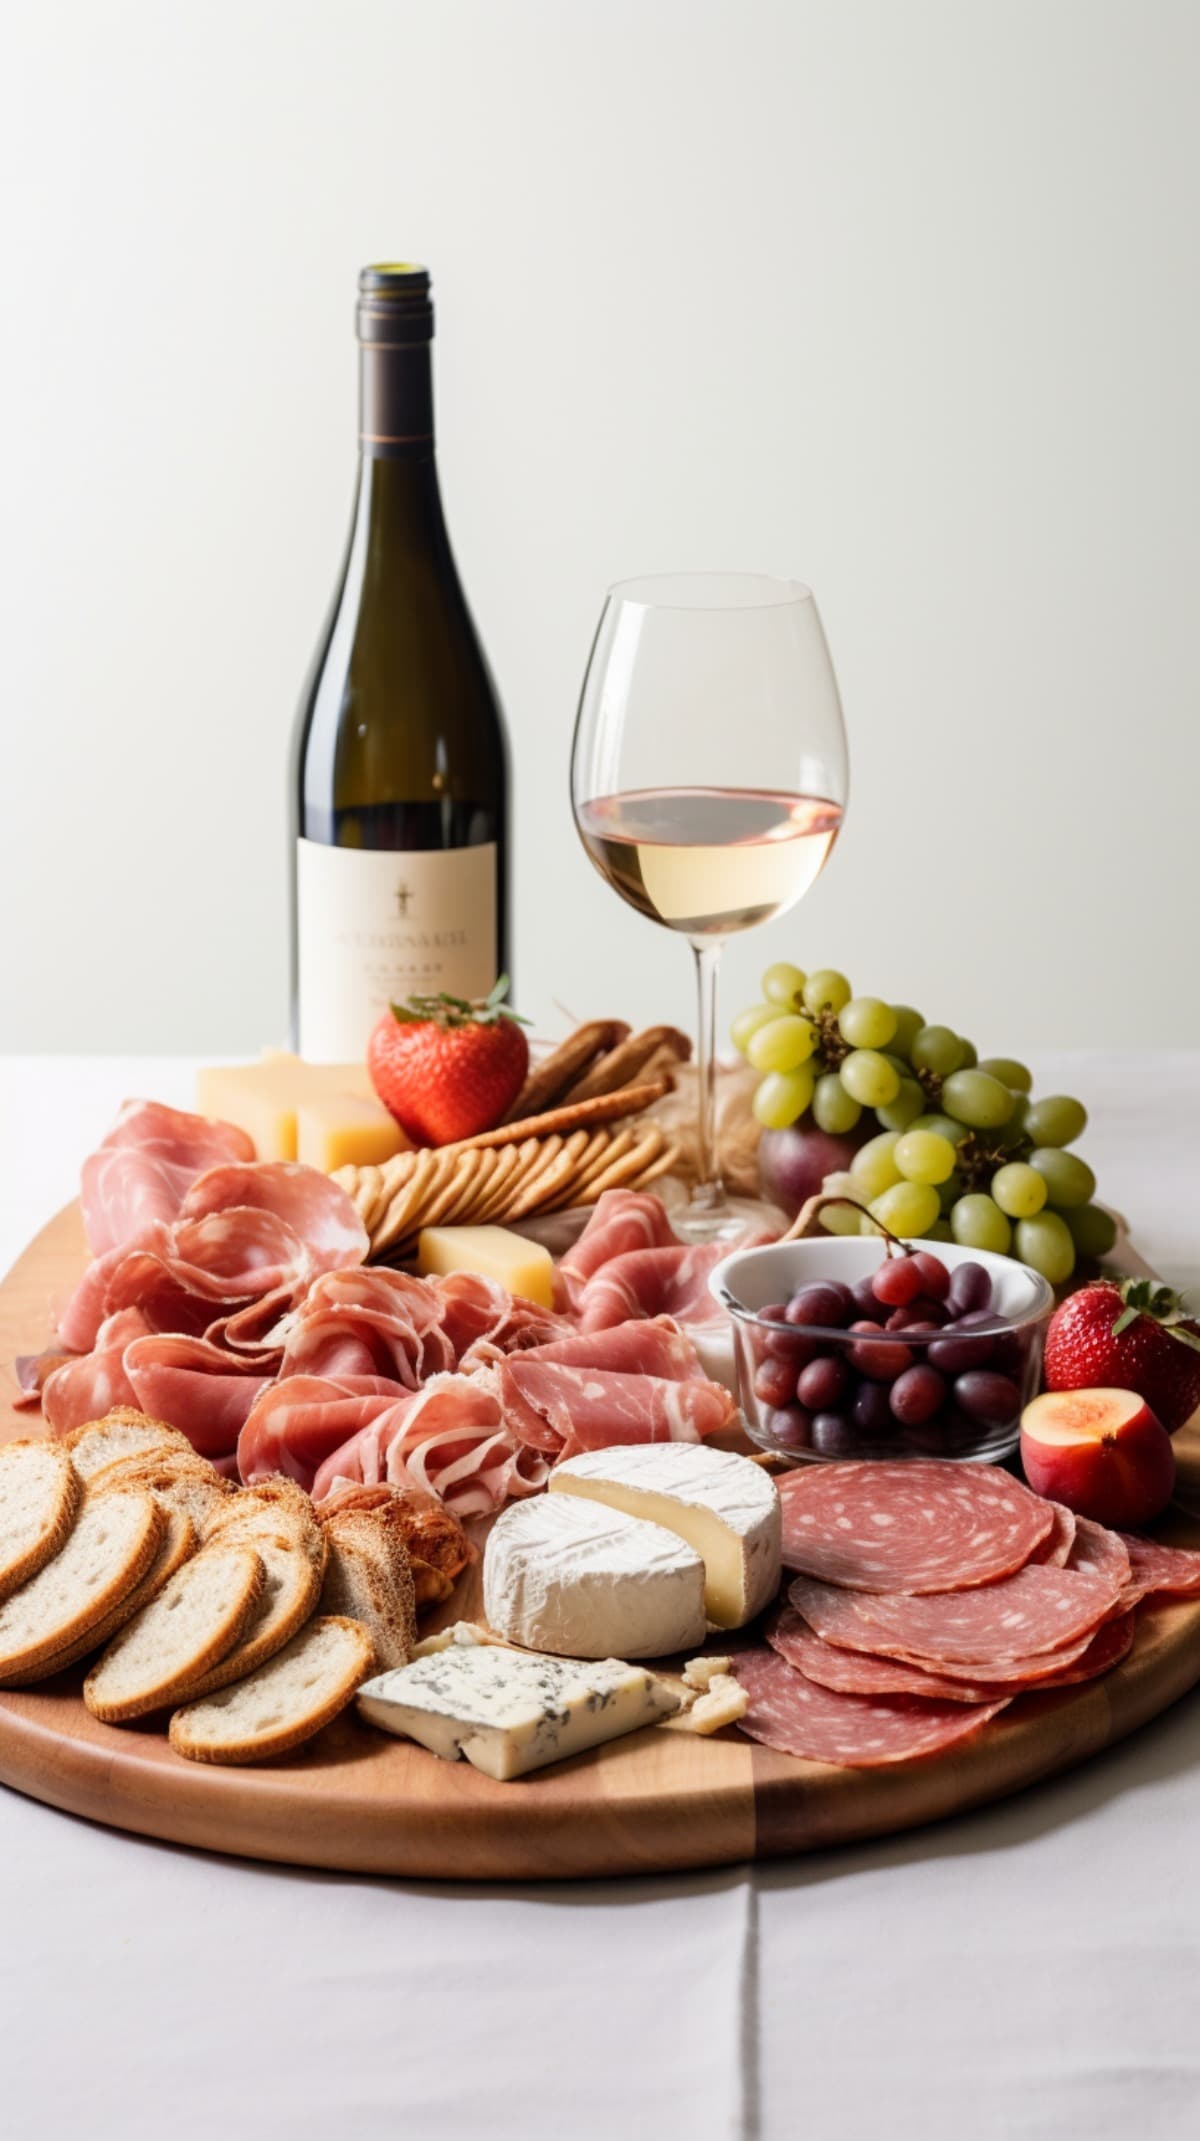 Cheese board with meat, cheese, fruit, and wine